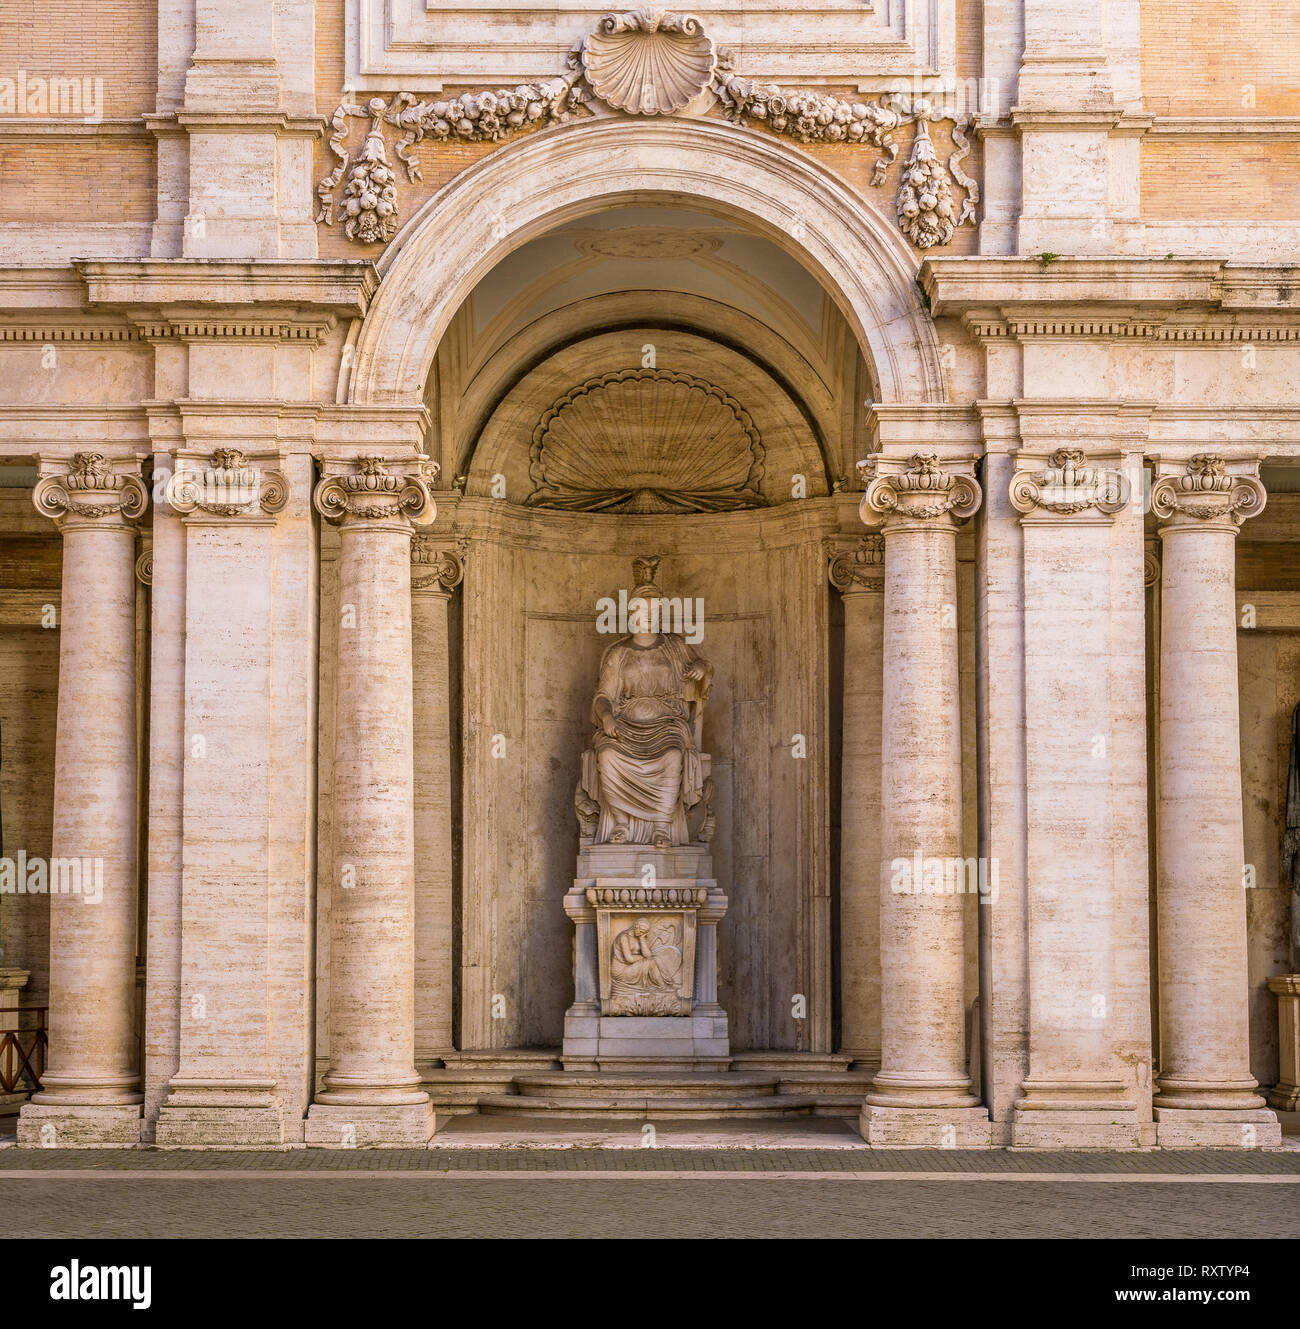 The Capitoline Museums is a single museum containing a group of art and archaeological museums in Piazza del Campidoglio, on top of the Capitoline Hil Stock Photo